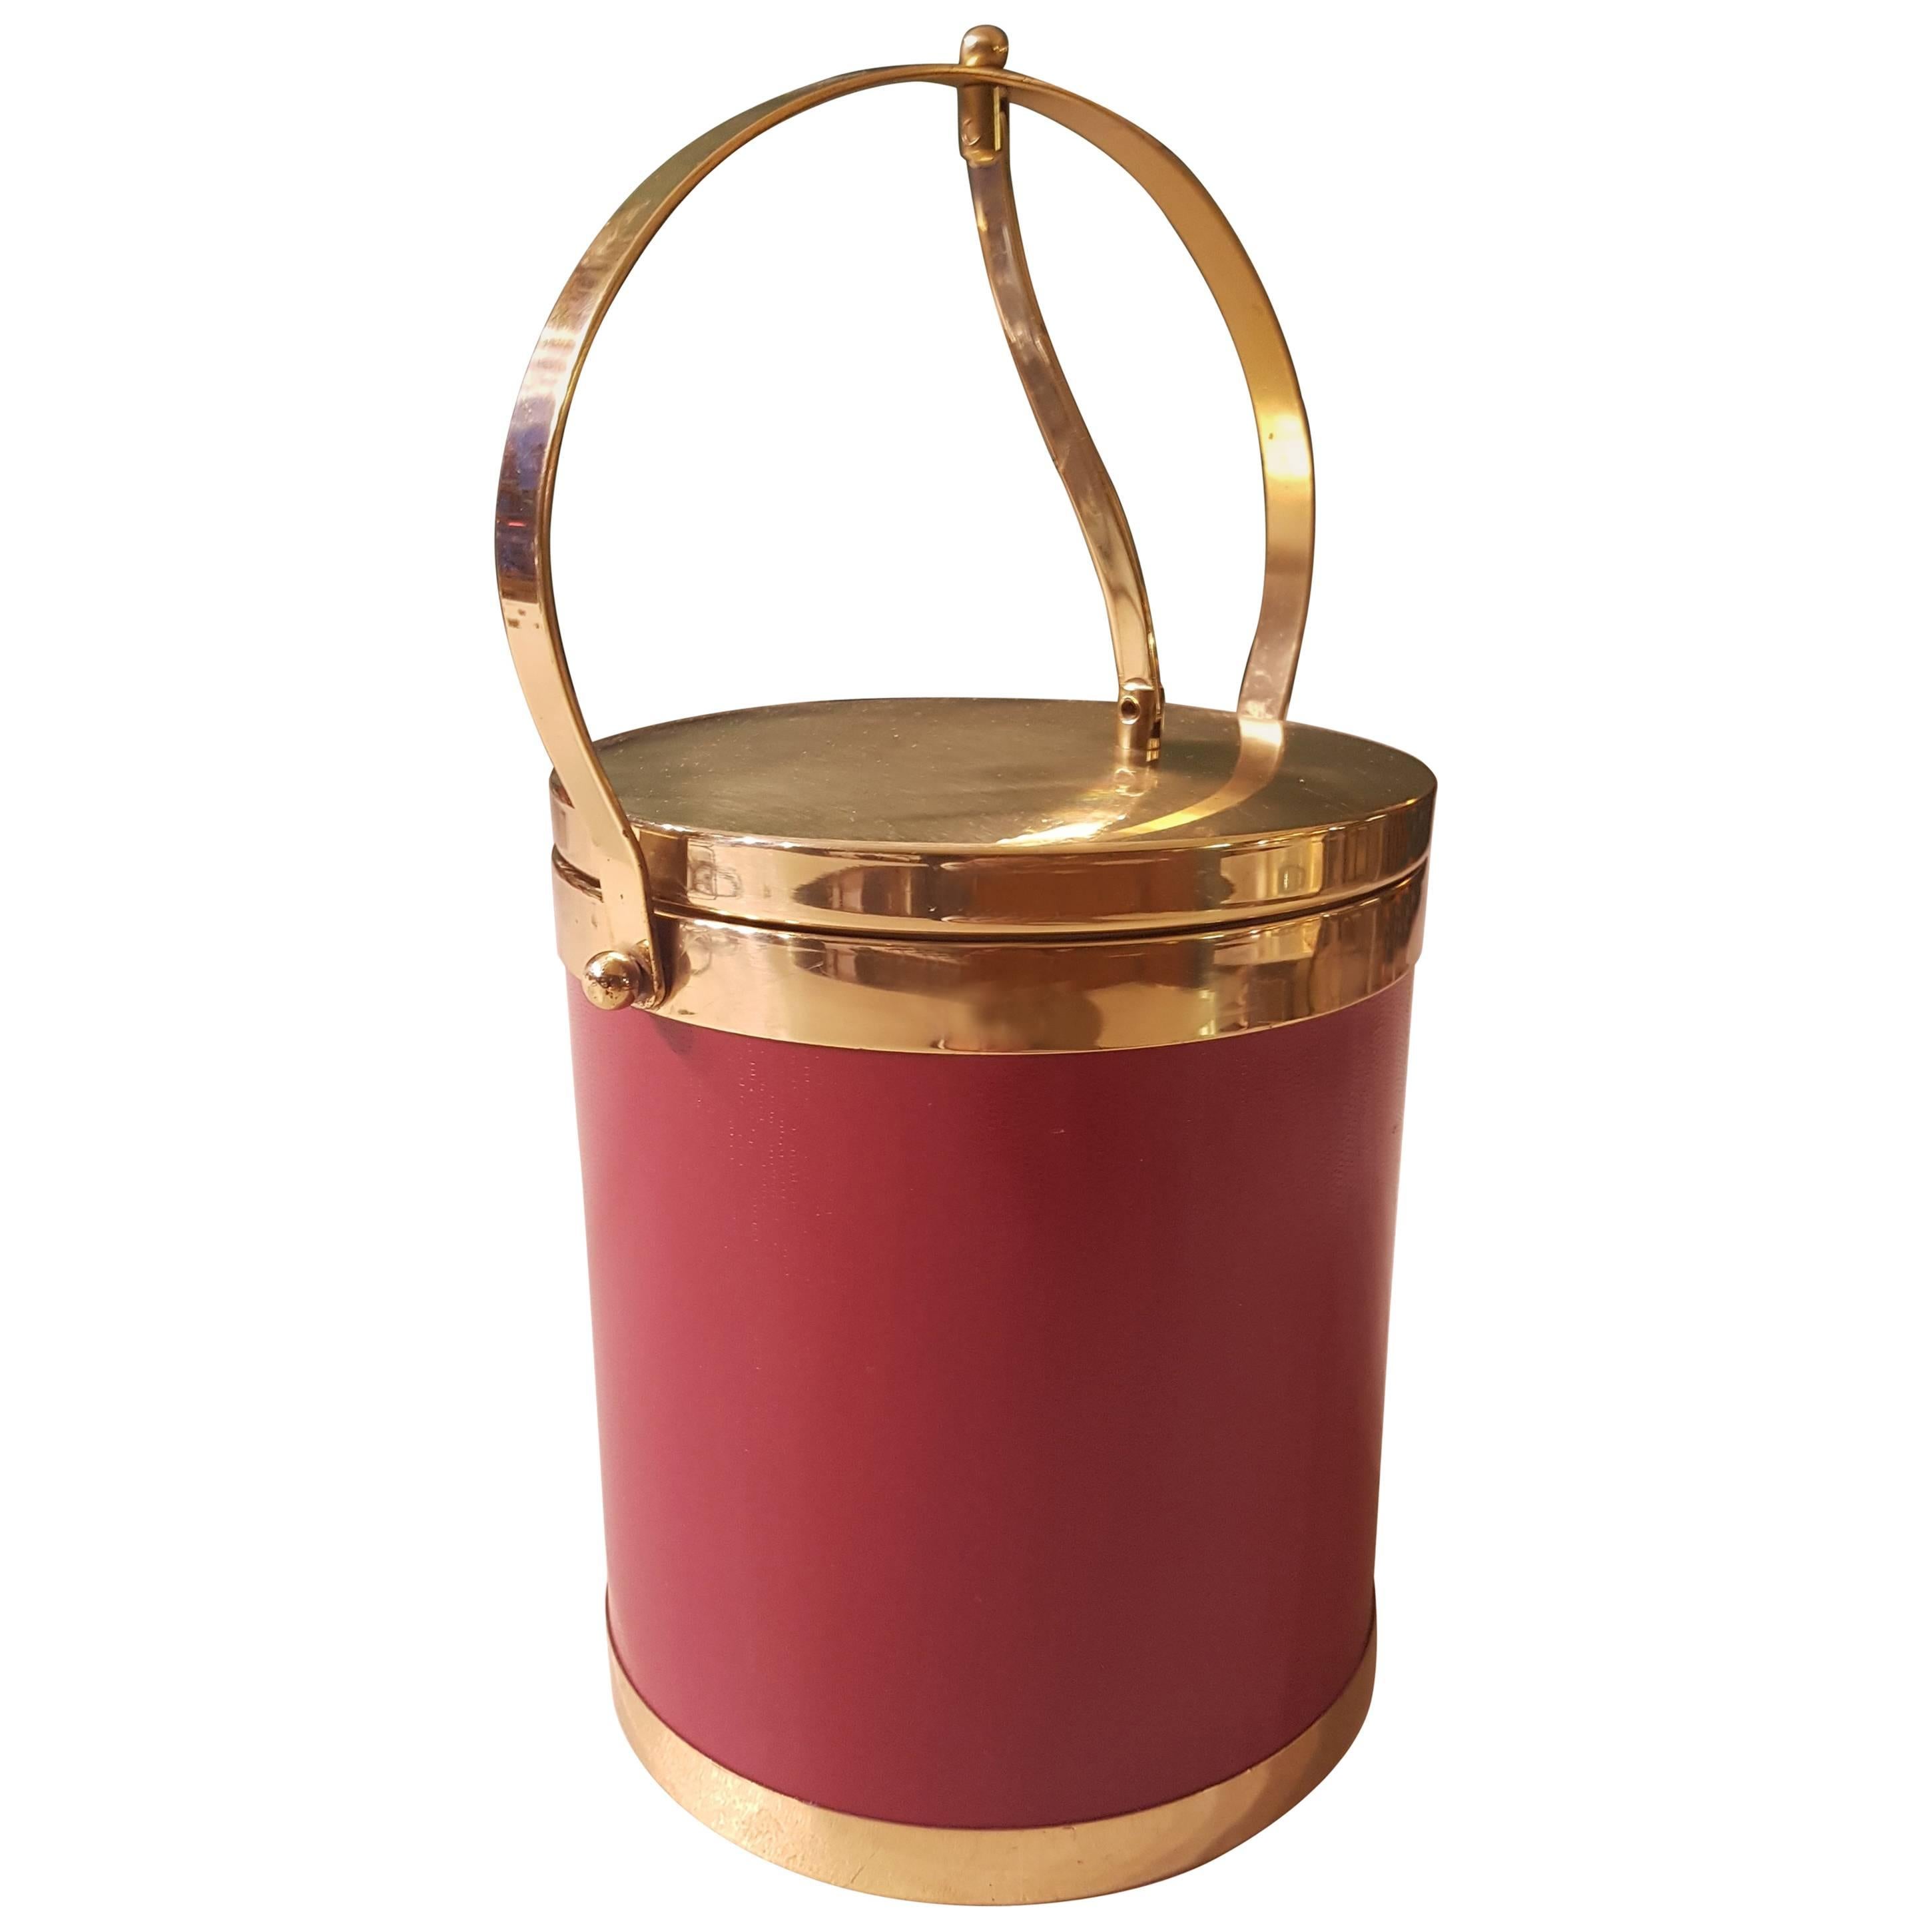 20th Century Belgian Red Ice Bucket Made of Brass and Imitation Leather, 1970s For Sale